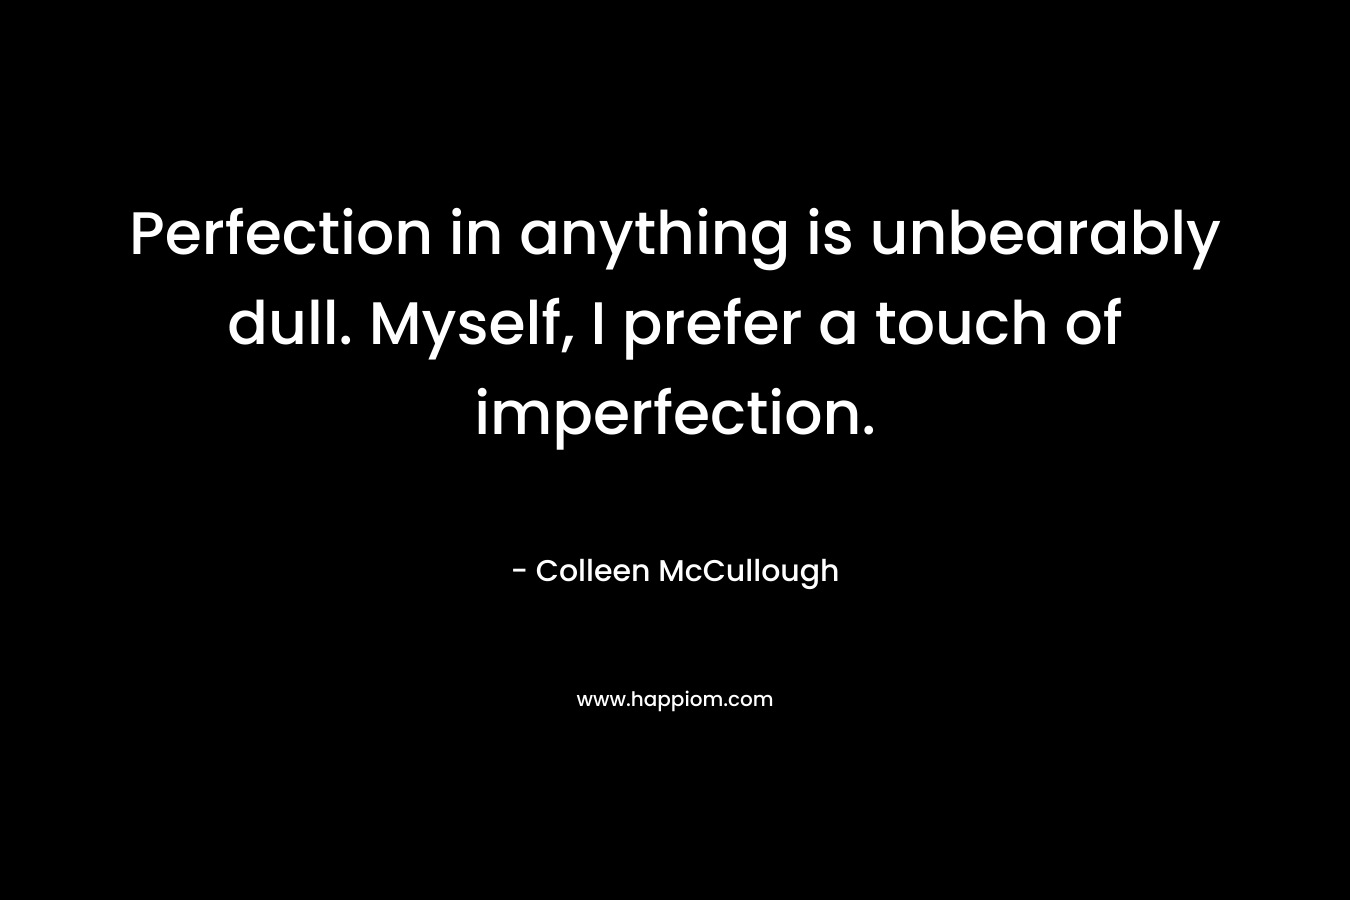 Perfection in anything is unbearably dull. Myself, I prefer a touch of imperfection. – Colleen McCullough